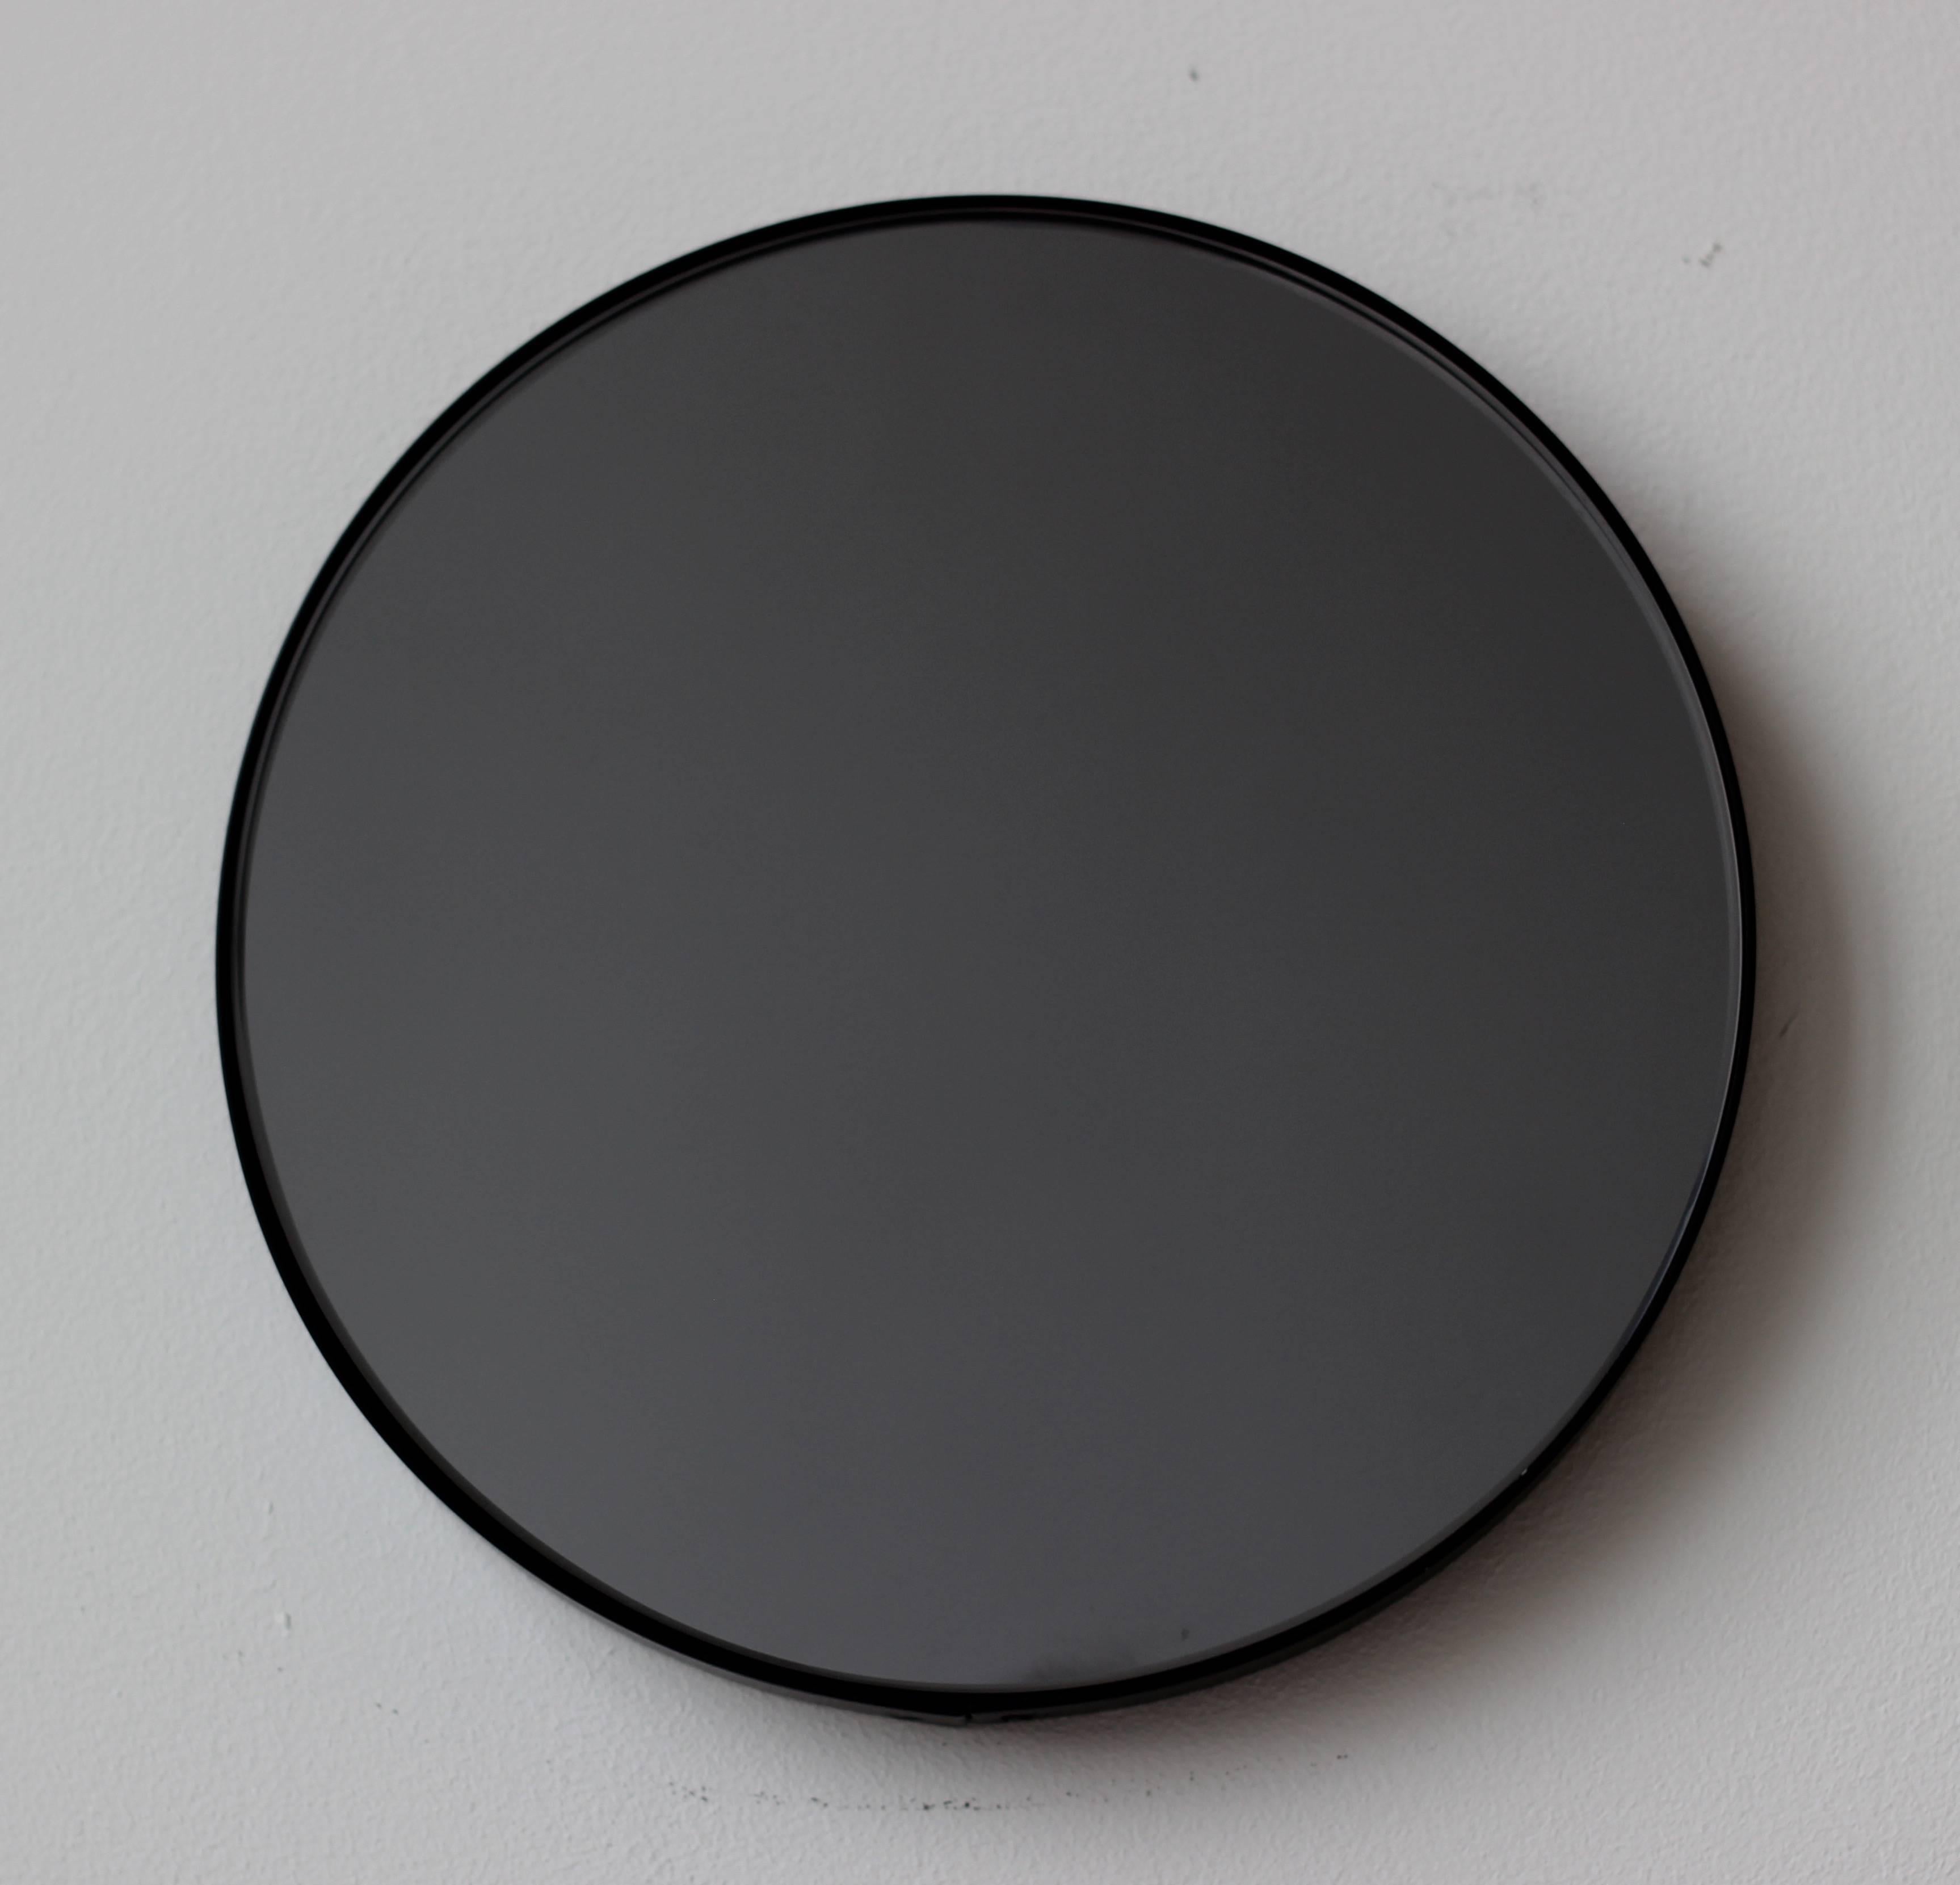 Minimalist black tinted round mirror with an elegant black powder coated aluminium frame. Designed and handcrafted in London, UK.

Medium, large and extra-large mirrors (60, 80 and 100cm) are fitted with an ingenious French cleat (split batten)